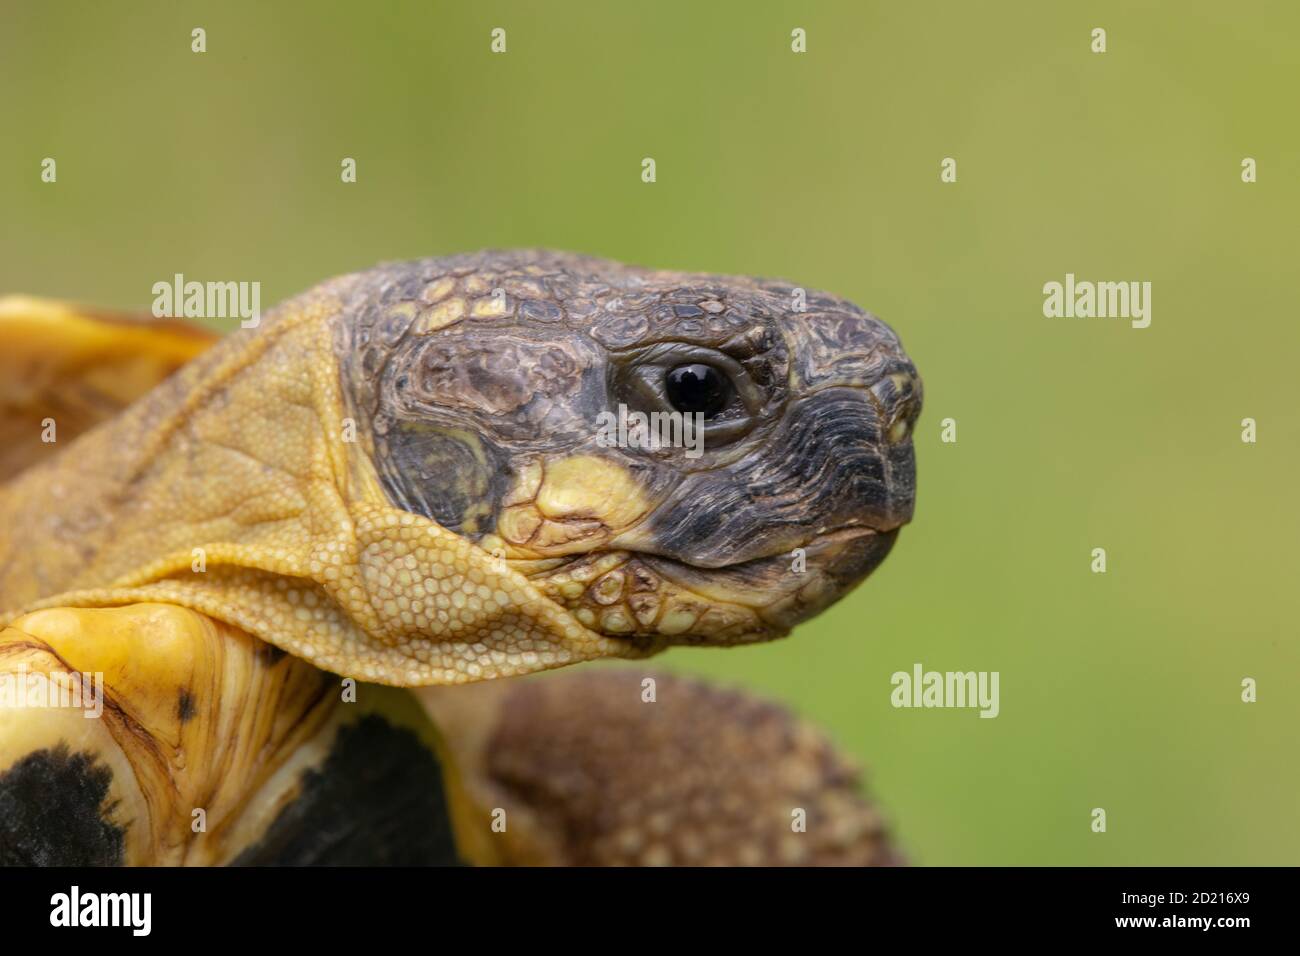 Herman’s Tortoise (Testudo hermani hermani). Head profile, showing the distinctive facial markings, pronounced yellow lower orbital patch of this, the Stock Photo